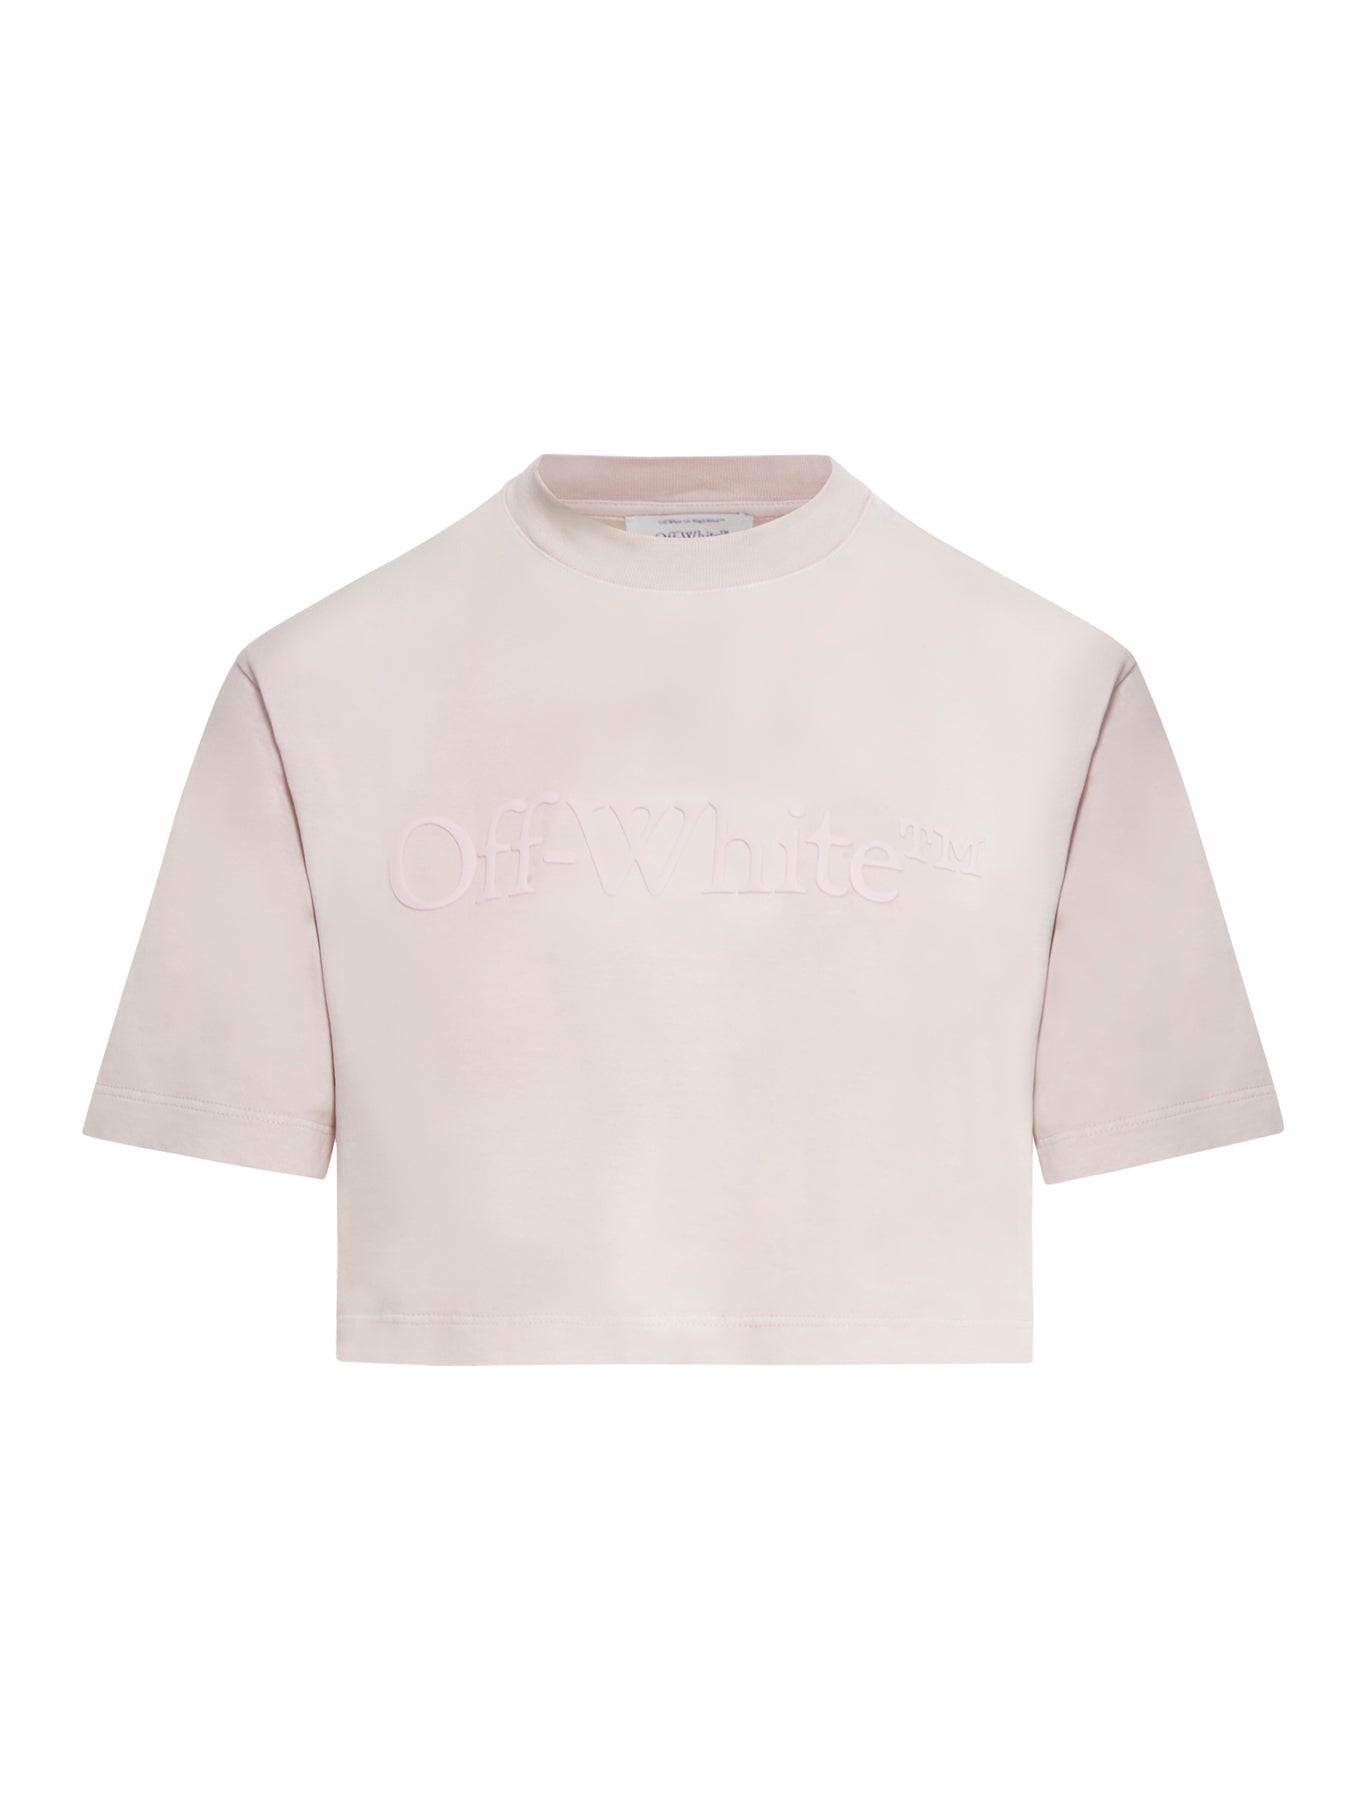 LAUNDRY CROPPED TEE